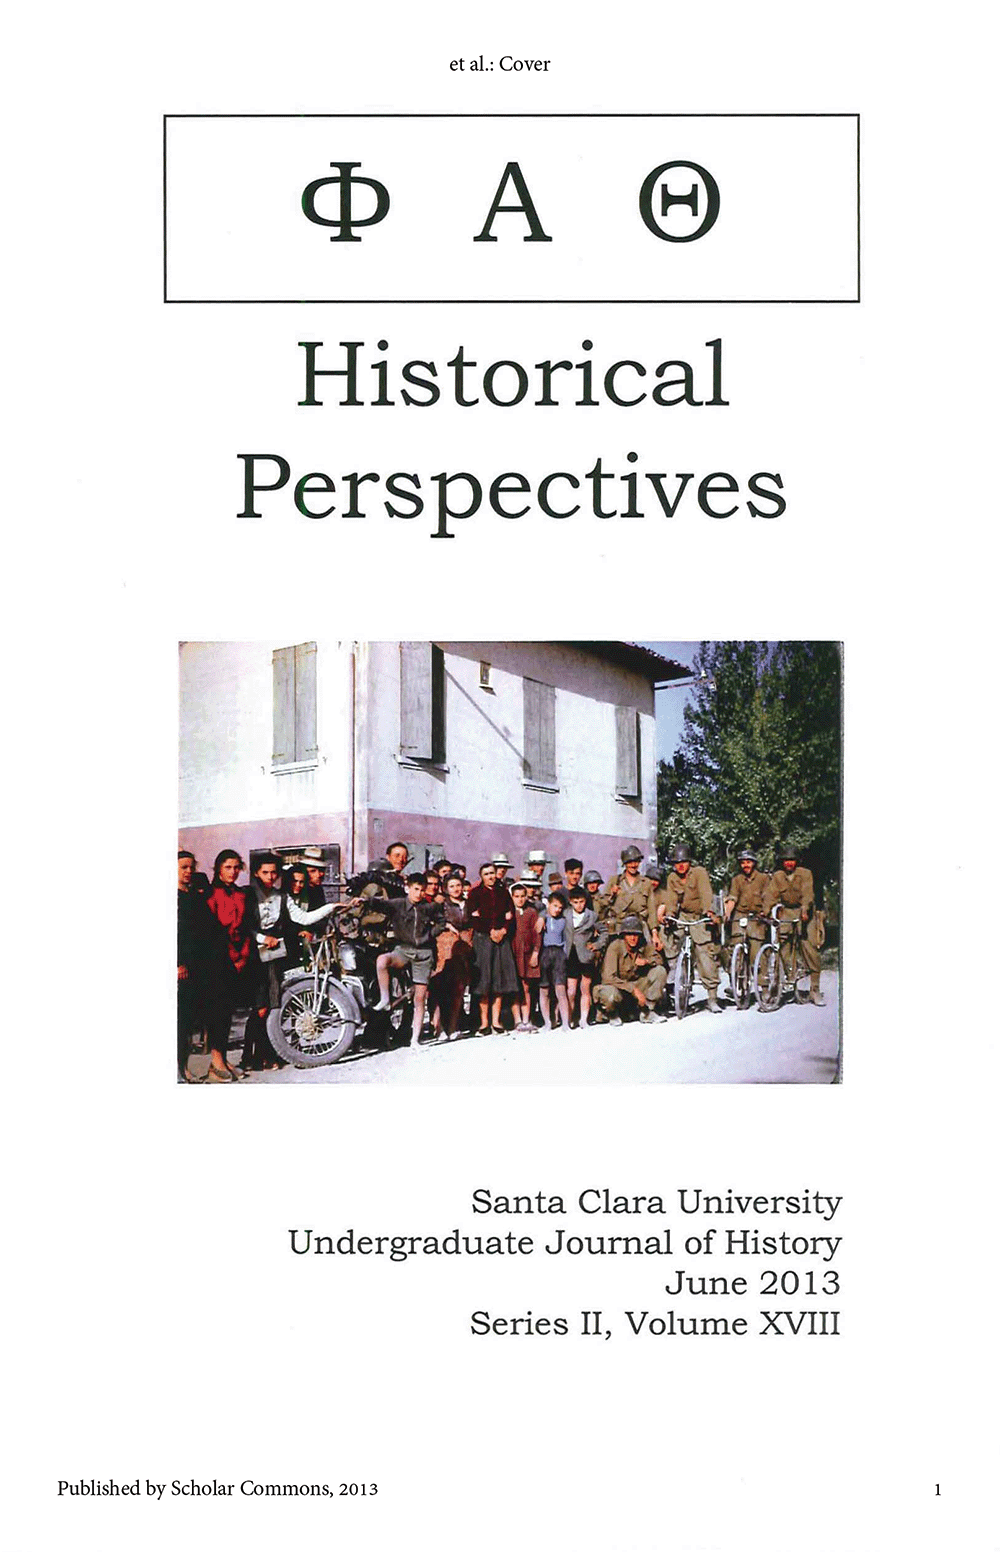 Historical Perspectives 2013, volume 18